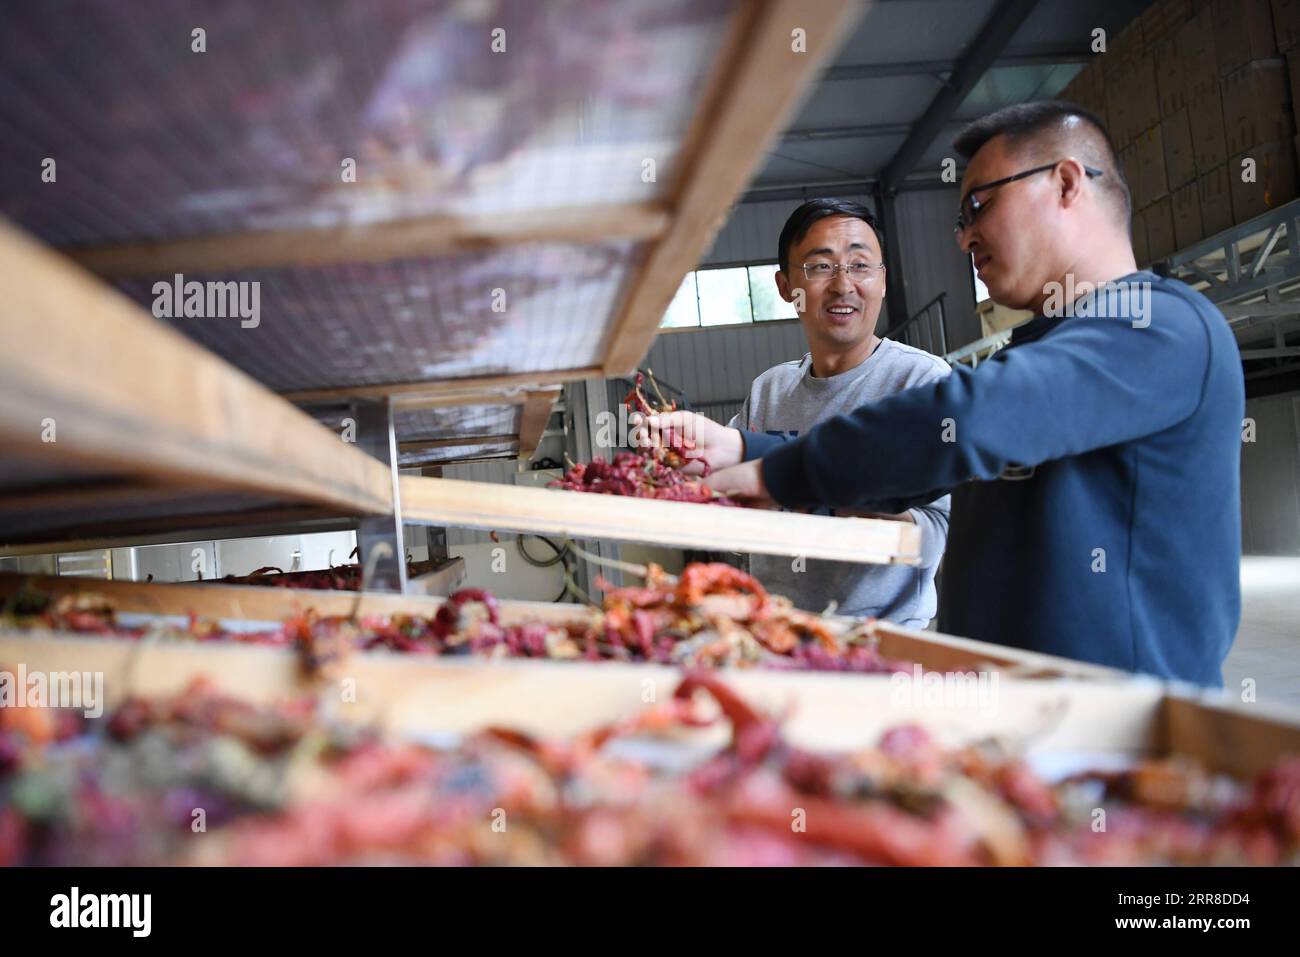 210503 -- TIANSHUI, May 3, 2021 -- Zhang Shuhao L works with his colleague in a warehouse in Mudan Township, Tianshui City of northwest China s Gansu Province, on April 28, 2021. Zhang Shuhao, 42, quit his well-paid job three years ago to start an agriculture company with a few partners sharing the same vision at a mountainous village in Mudan Township, Tianshui City. In three years, Xinghuarong, Zhang s company, contracted 6,200 mu about 413 hectares of idle arable lands, where terraced fields, greenhouses, and a reservoir have been built to grow diverse produces ranging from traditional Chin Stock Photo